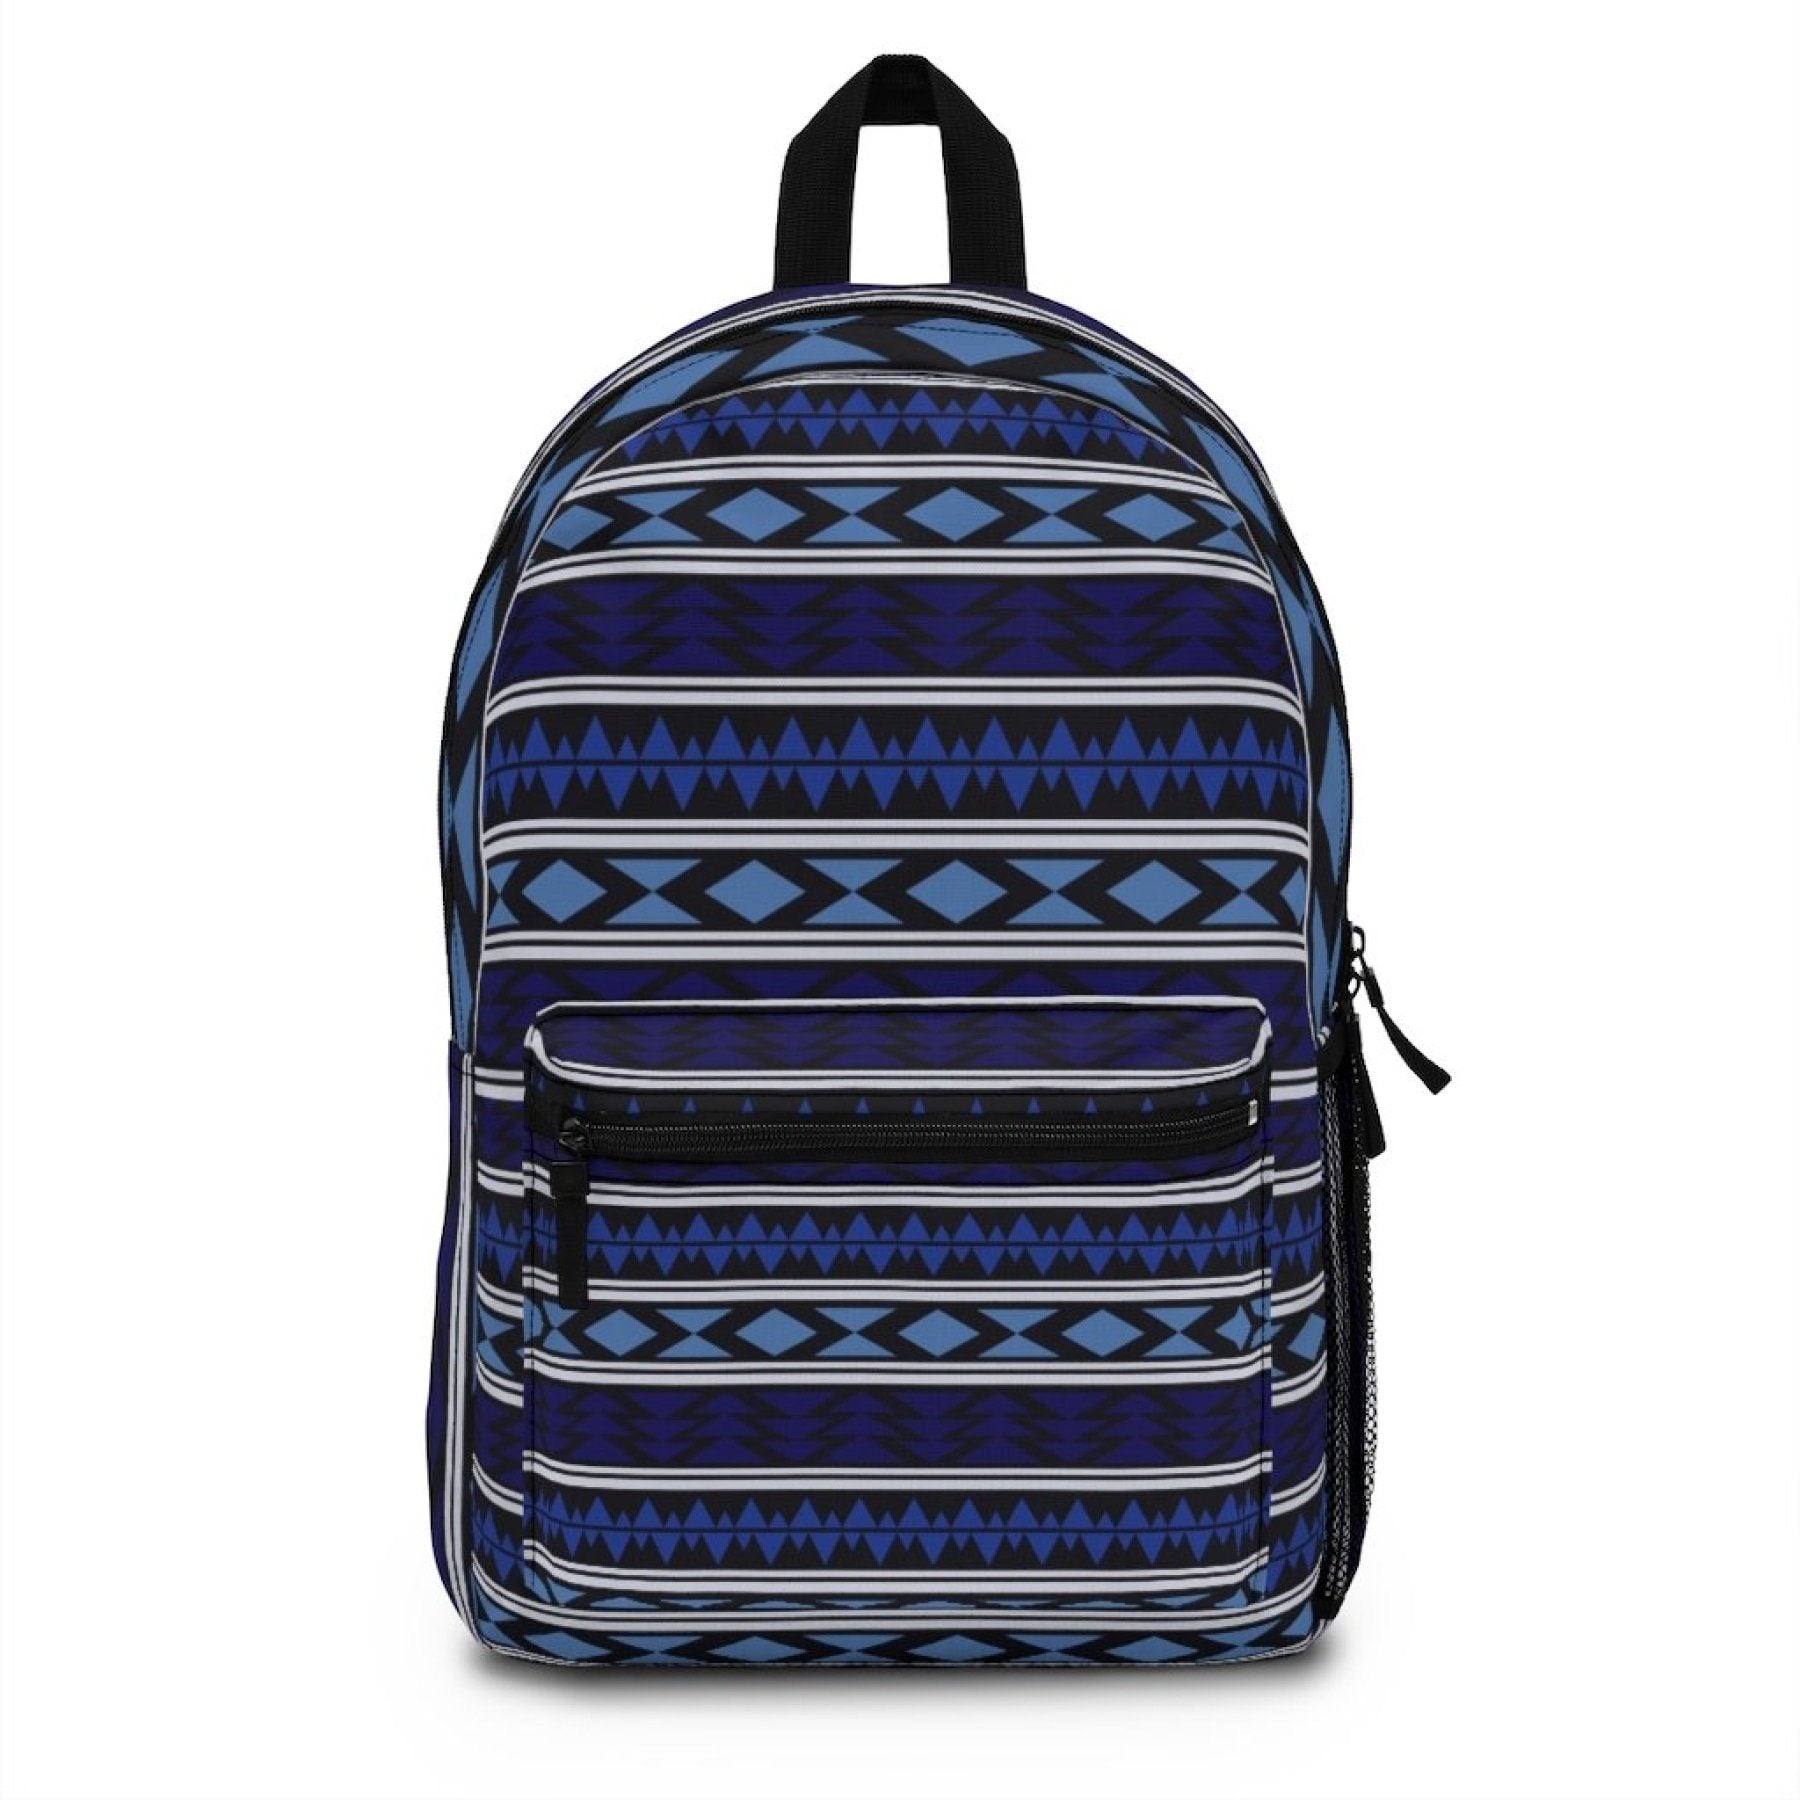 A backpack bag with a blue and black tribal pattern featuring multiple compartments and zippers, displayed against a white background, designed with adjustable shoulder straps.